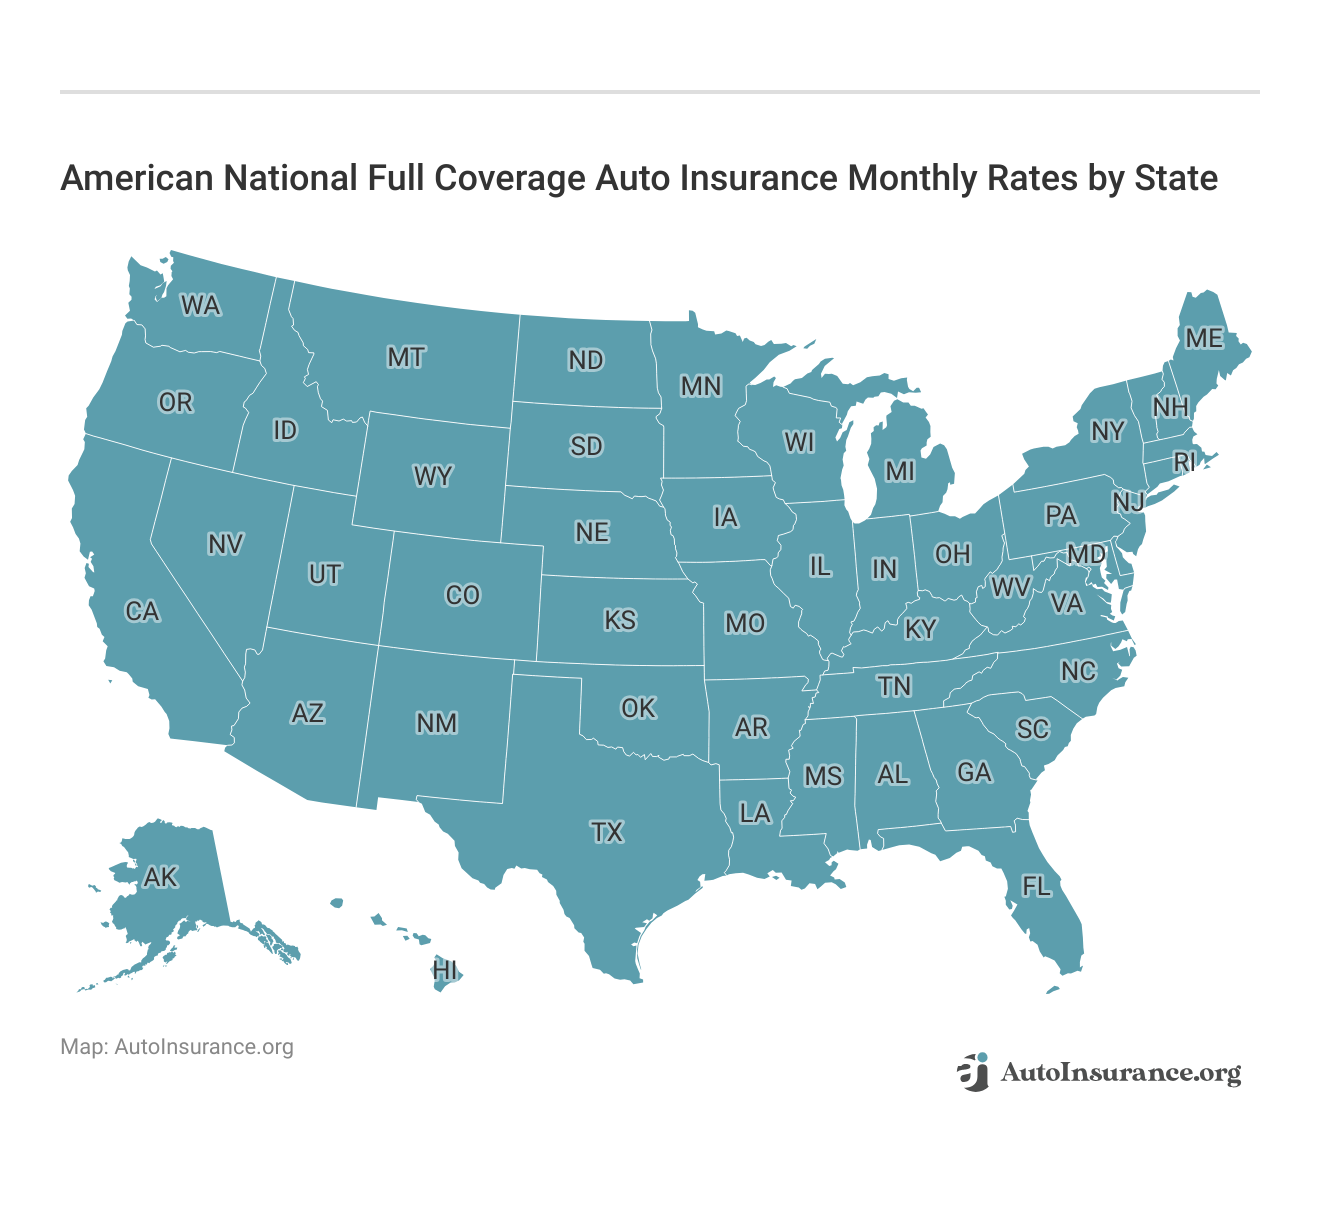 <h3>American National Full Coverage Auto Insurance Monthly Rates by State</h3>